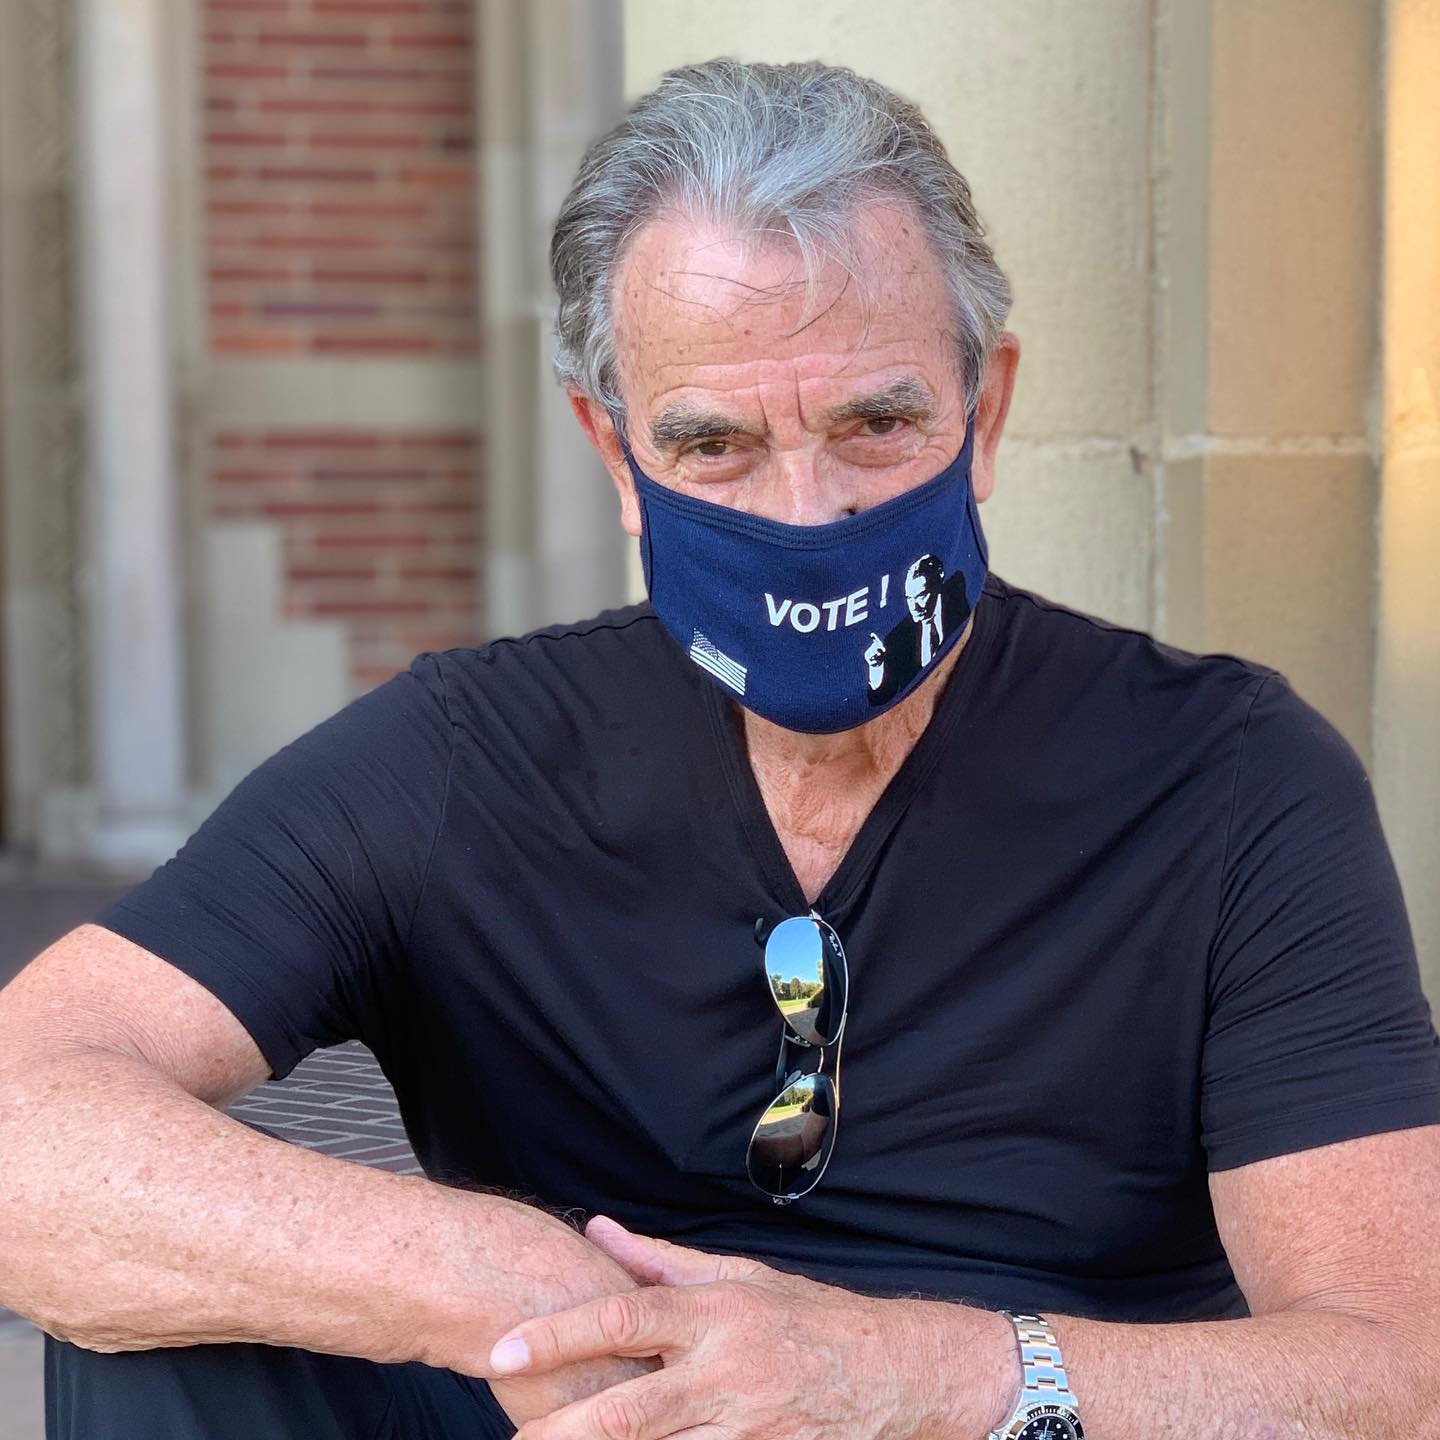 Eric Braeden wearing the mask with VOTE printed on it.